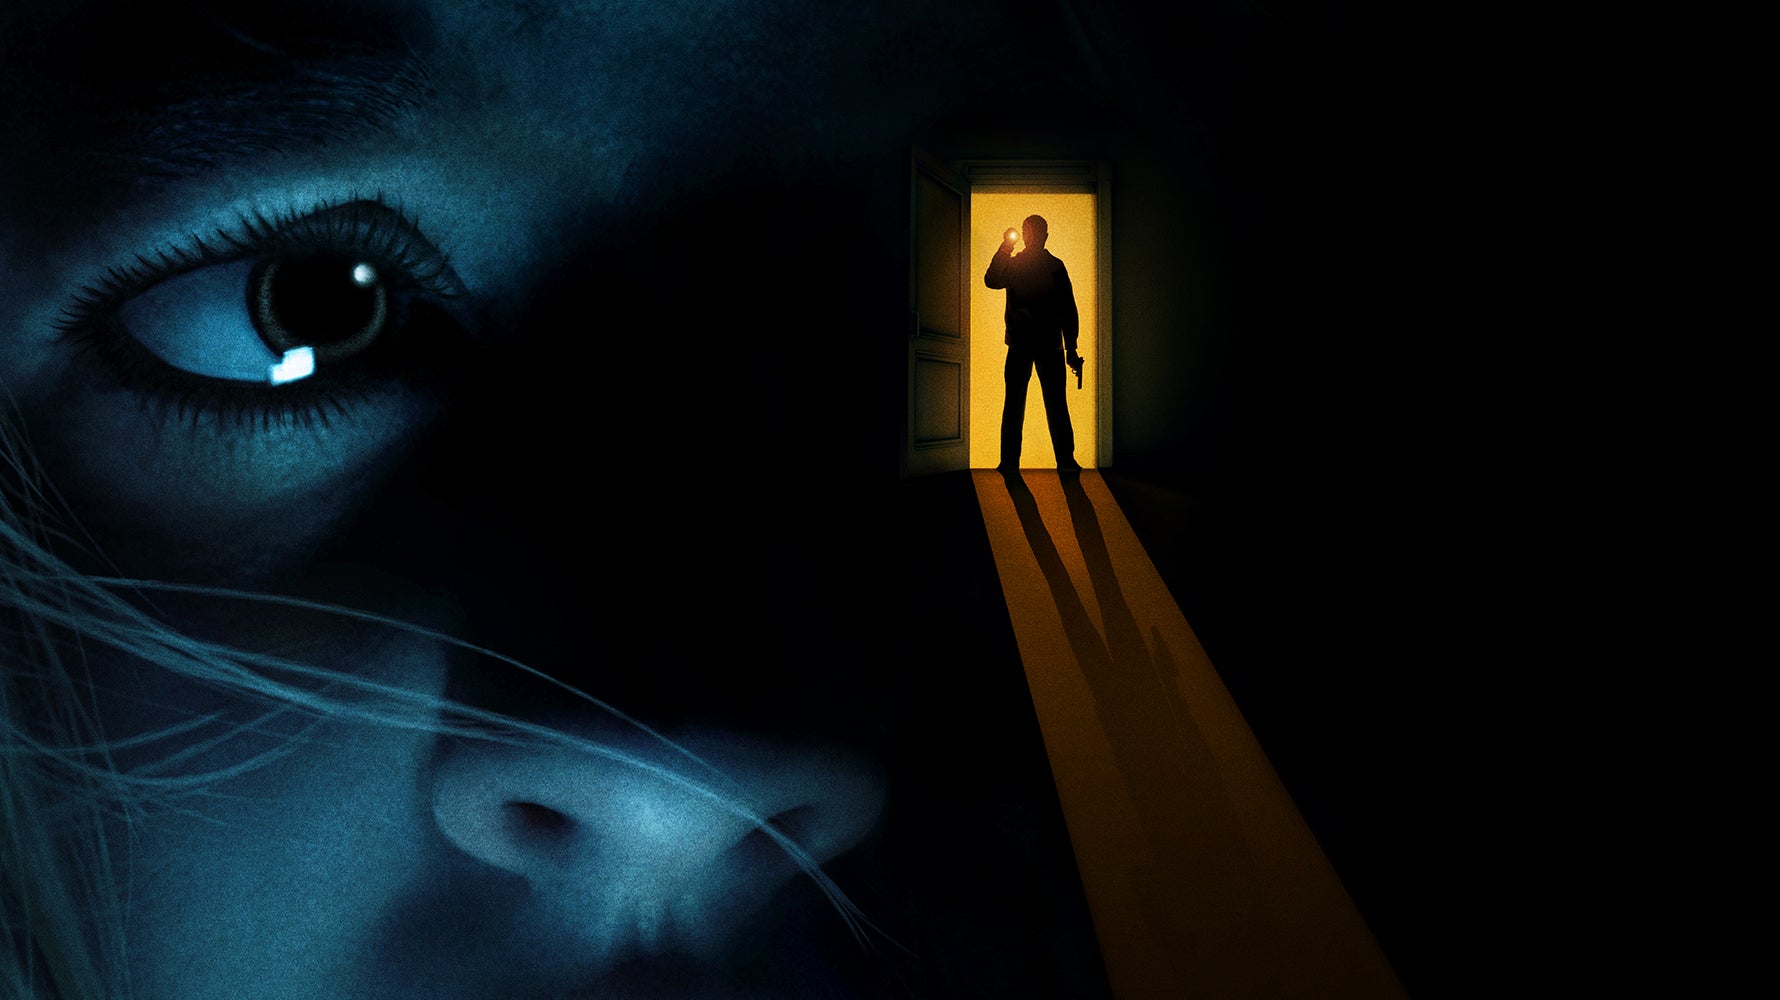 See For Me review: A home-invasion thriller with a tech twist